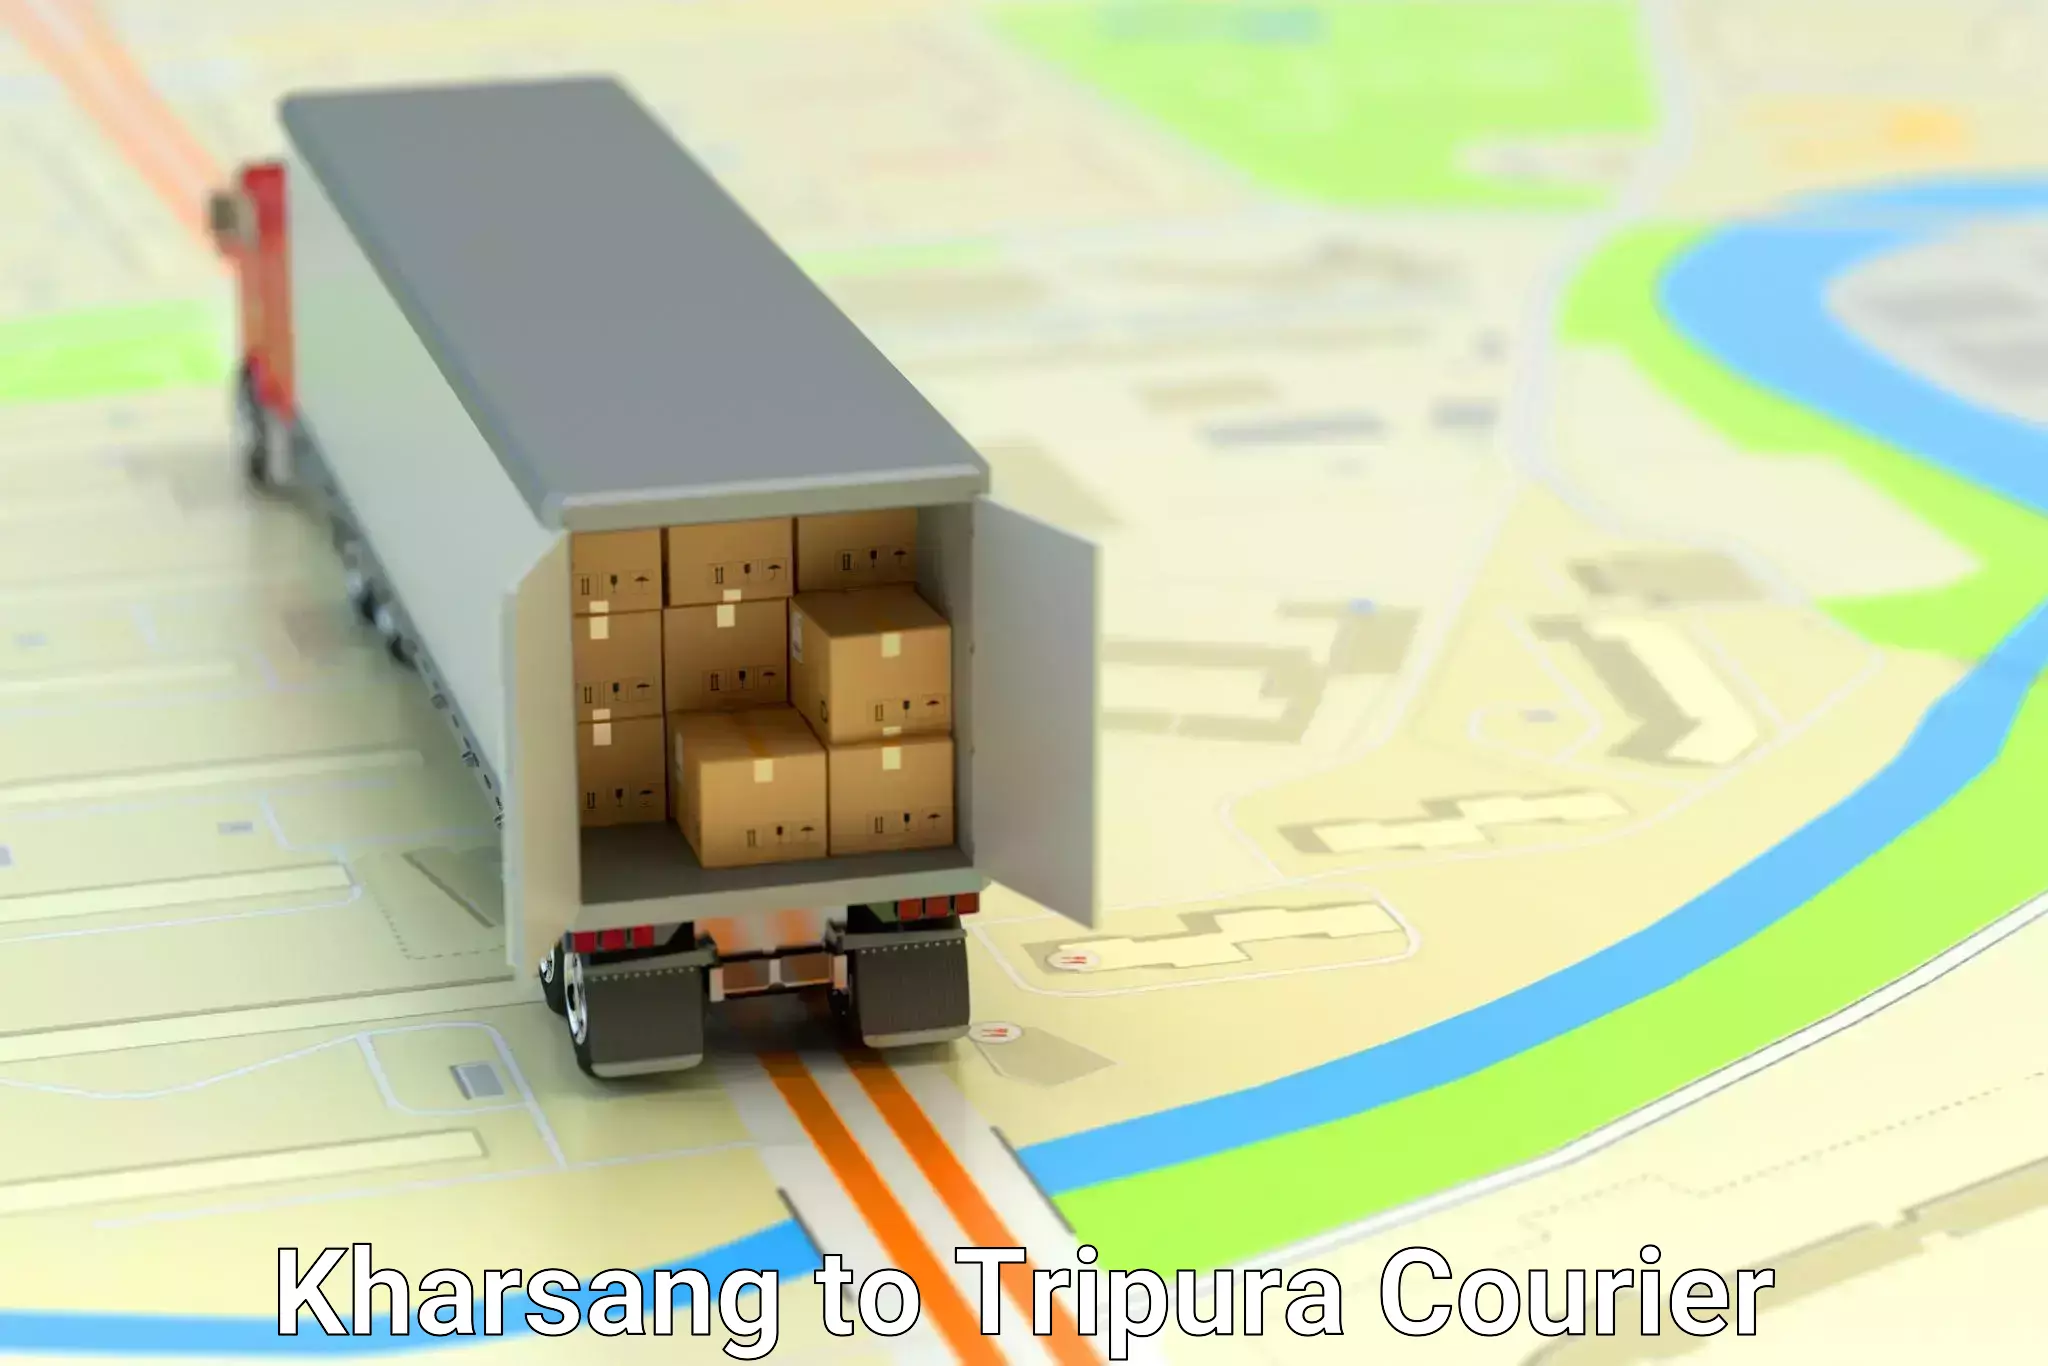 State-of-the-art courier technology Kharsang to Agartala